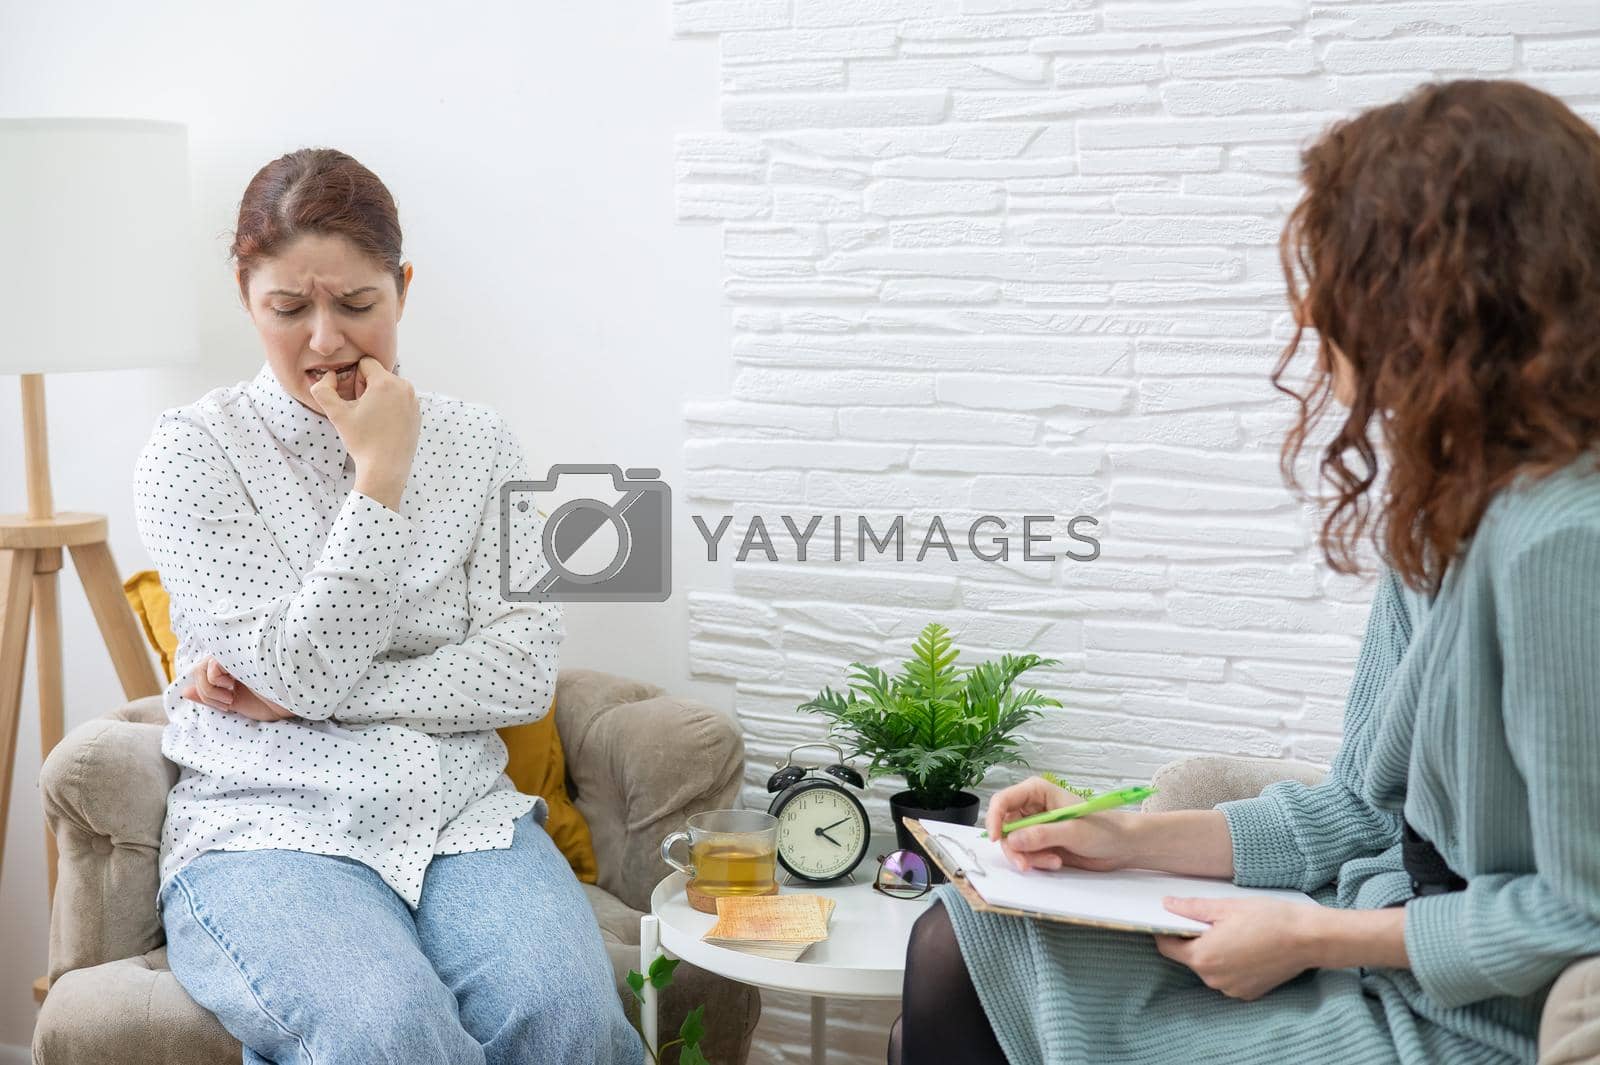 Royalty free image of Worried caucasian woman at a session with a psychotherapist. by mrwed54